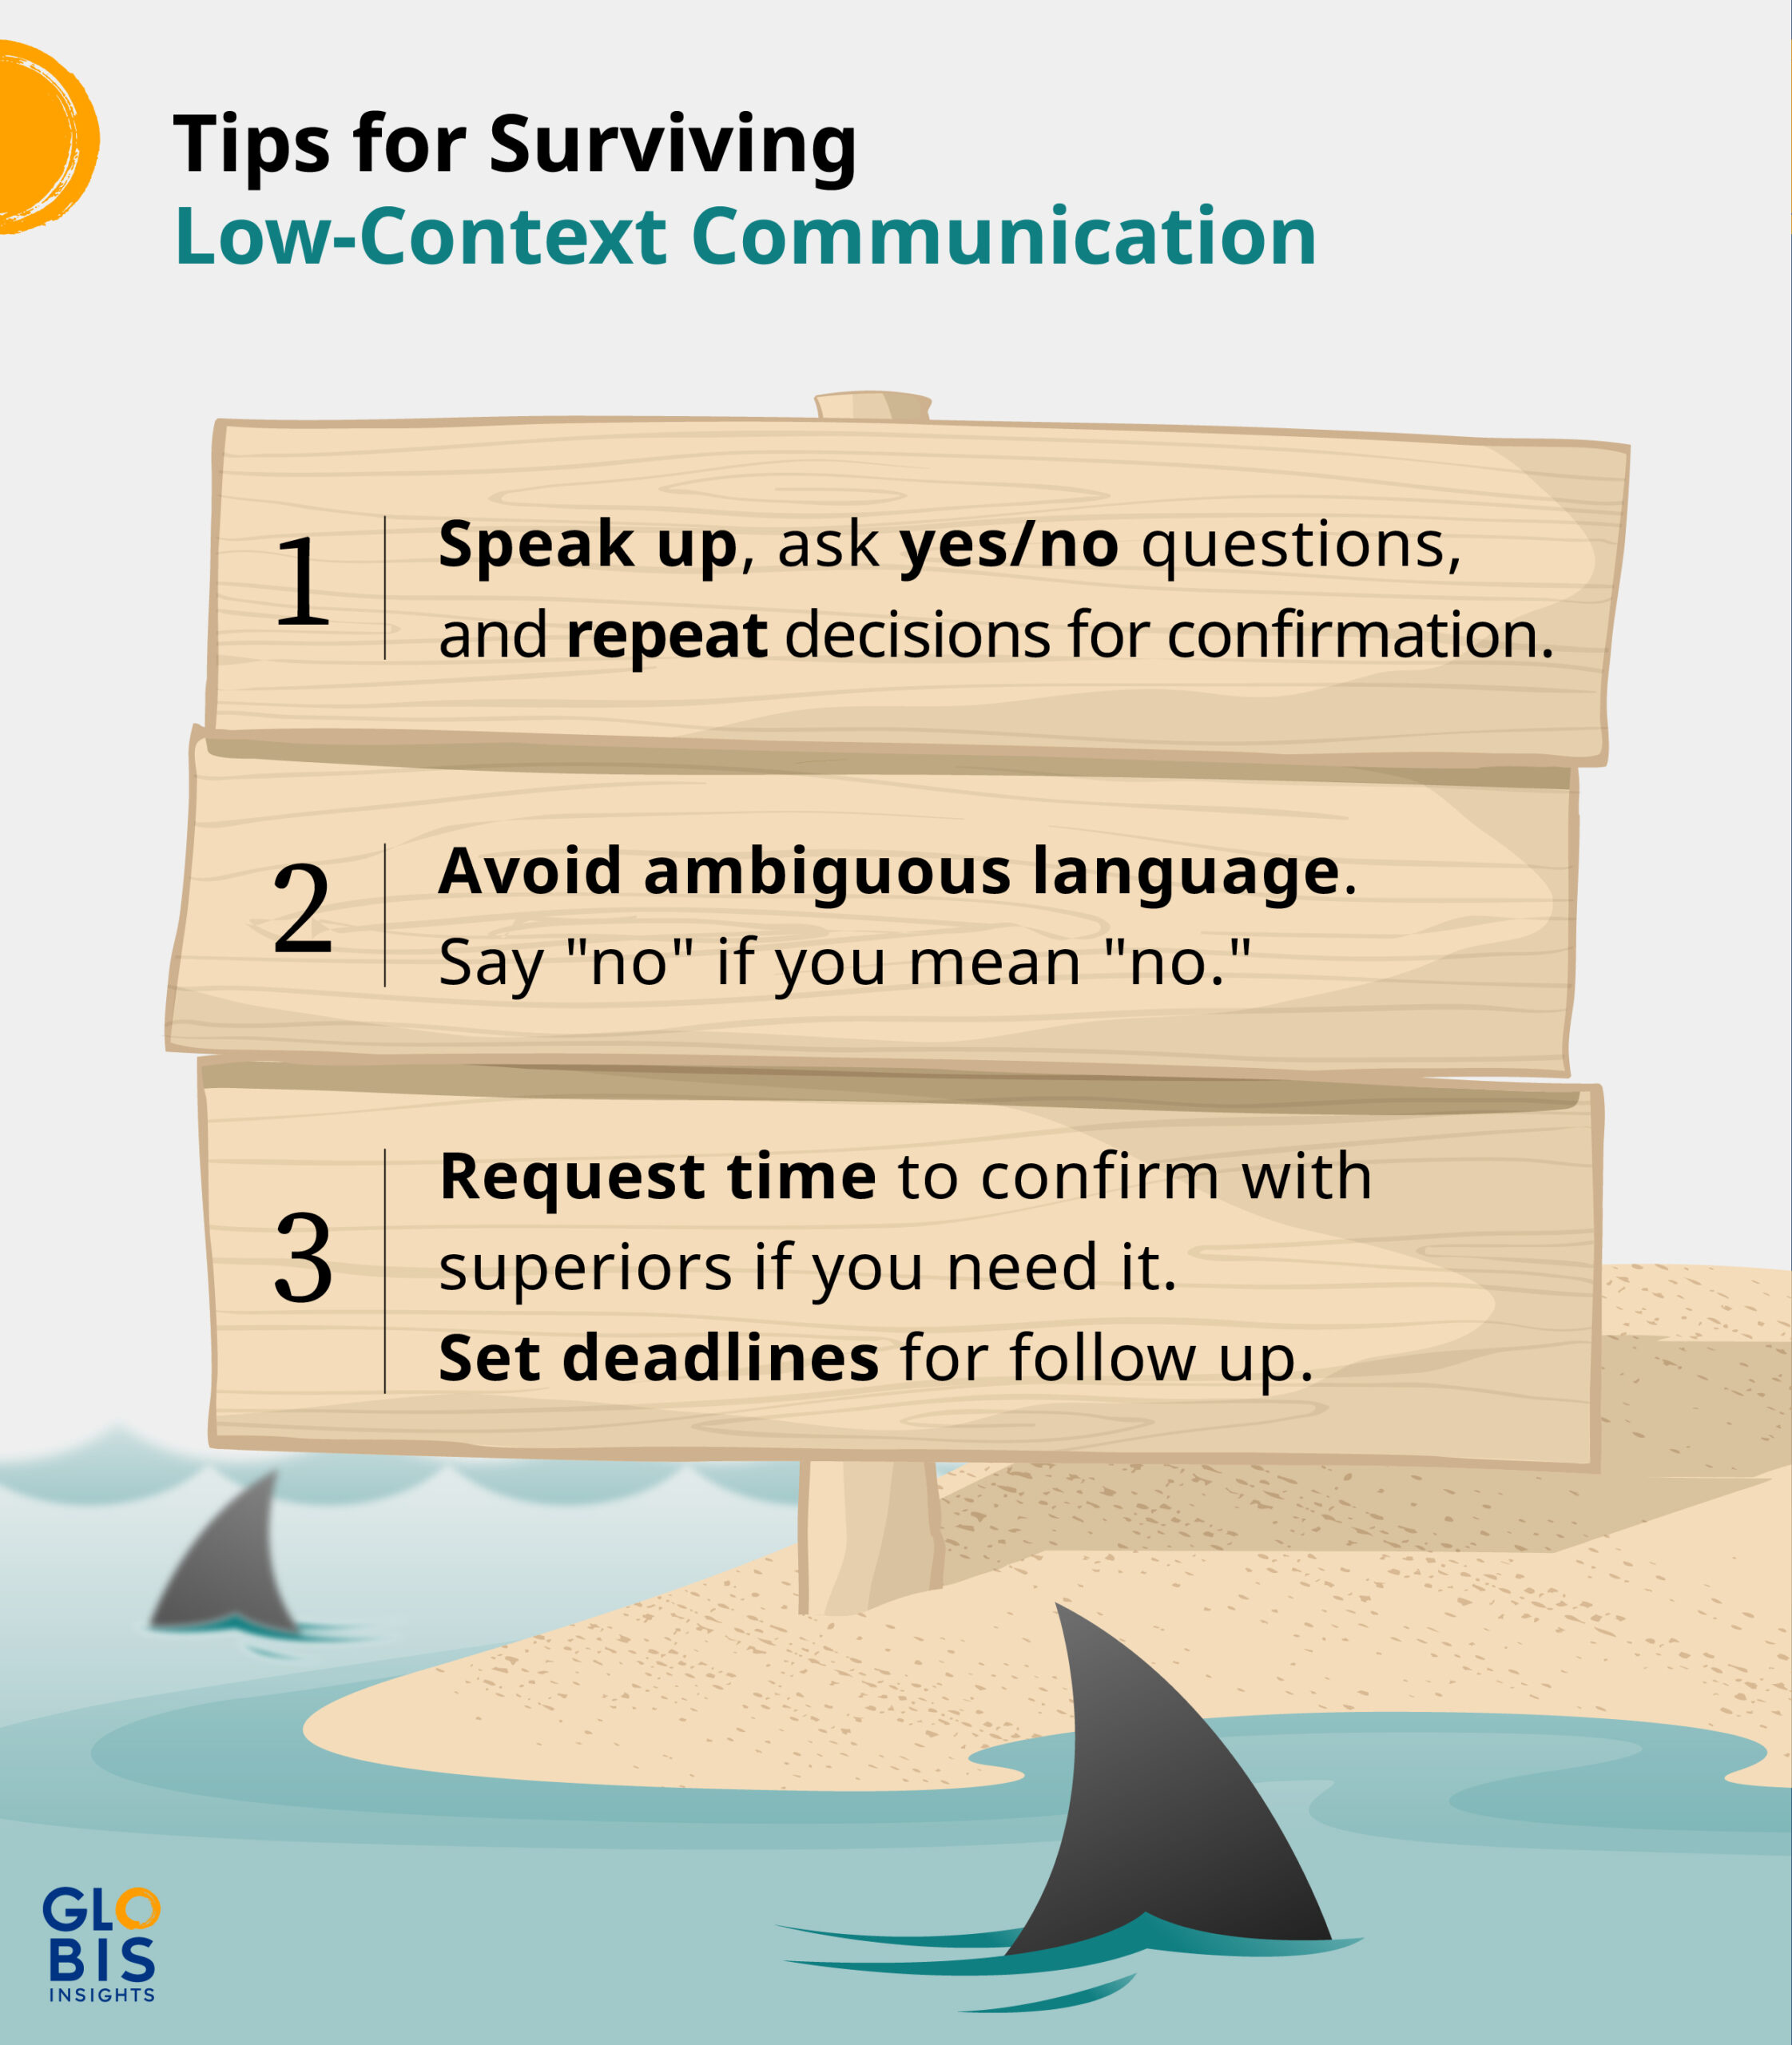 Infographic with tips for low-context communication